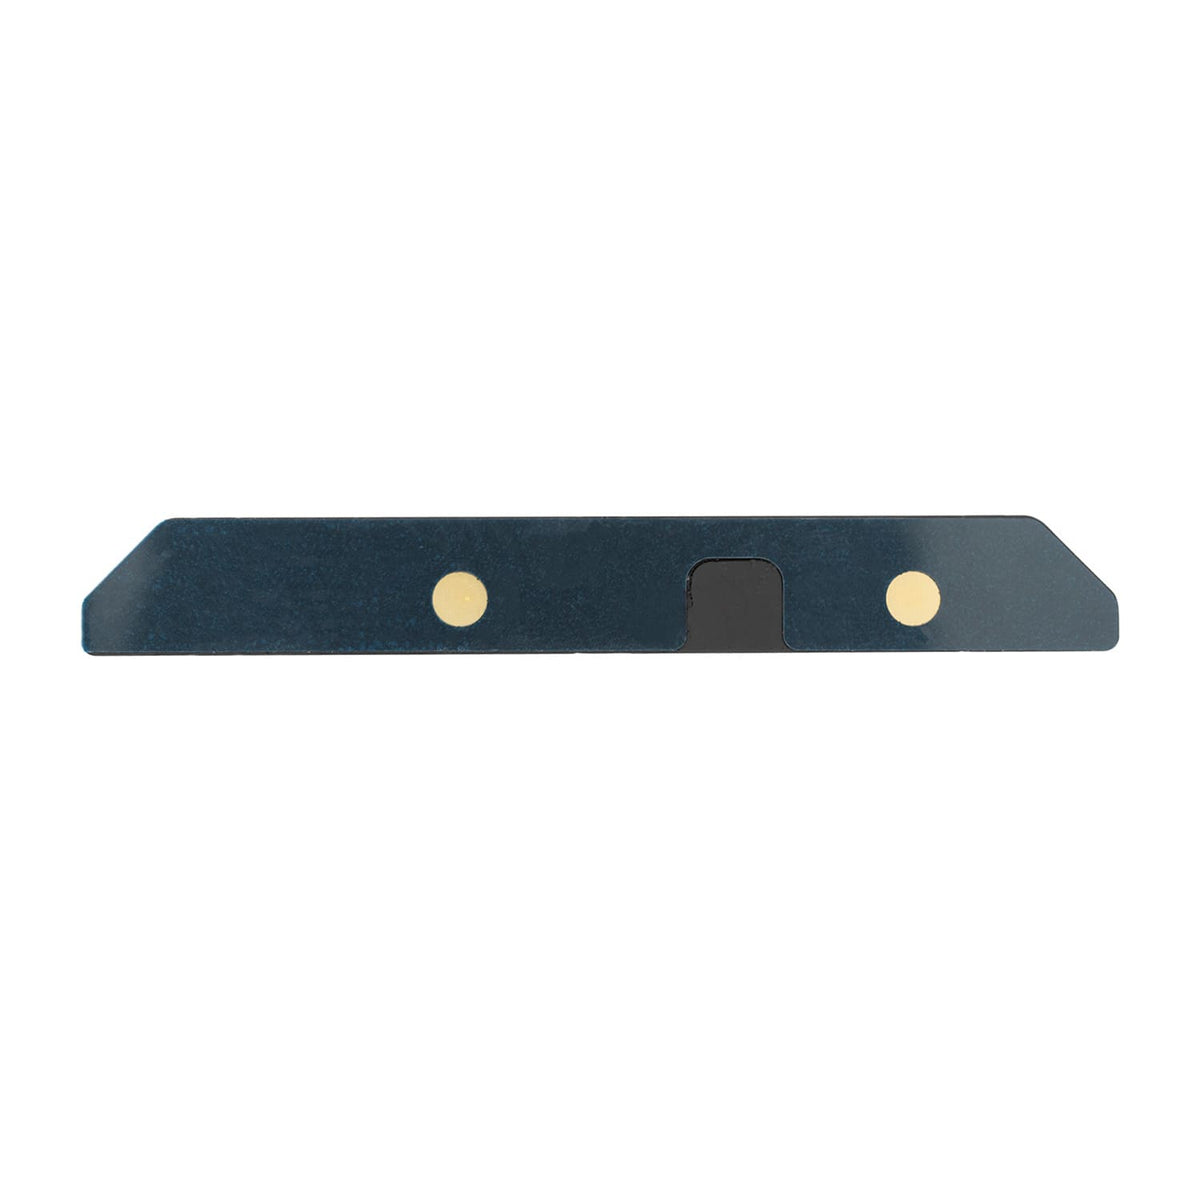 TRACKPAD CONNECTOR BOARD FOR MACBOOK AIR 13" M1 A2337 (LATE 2020)